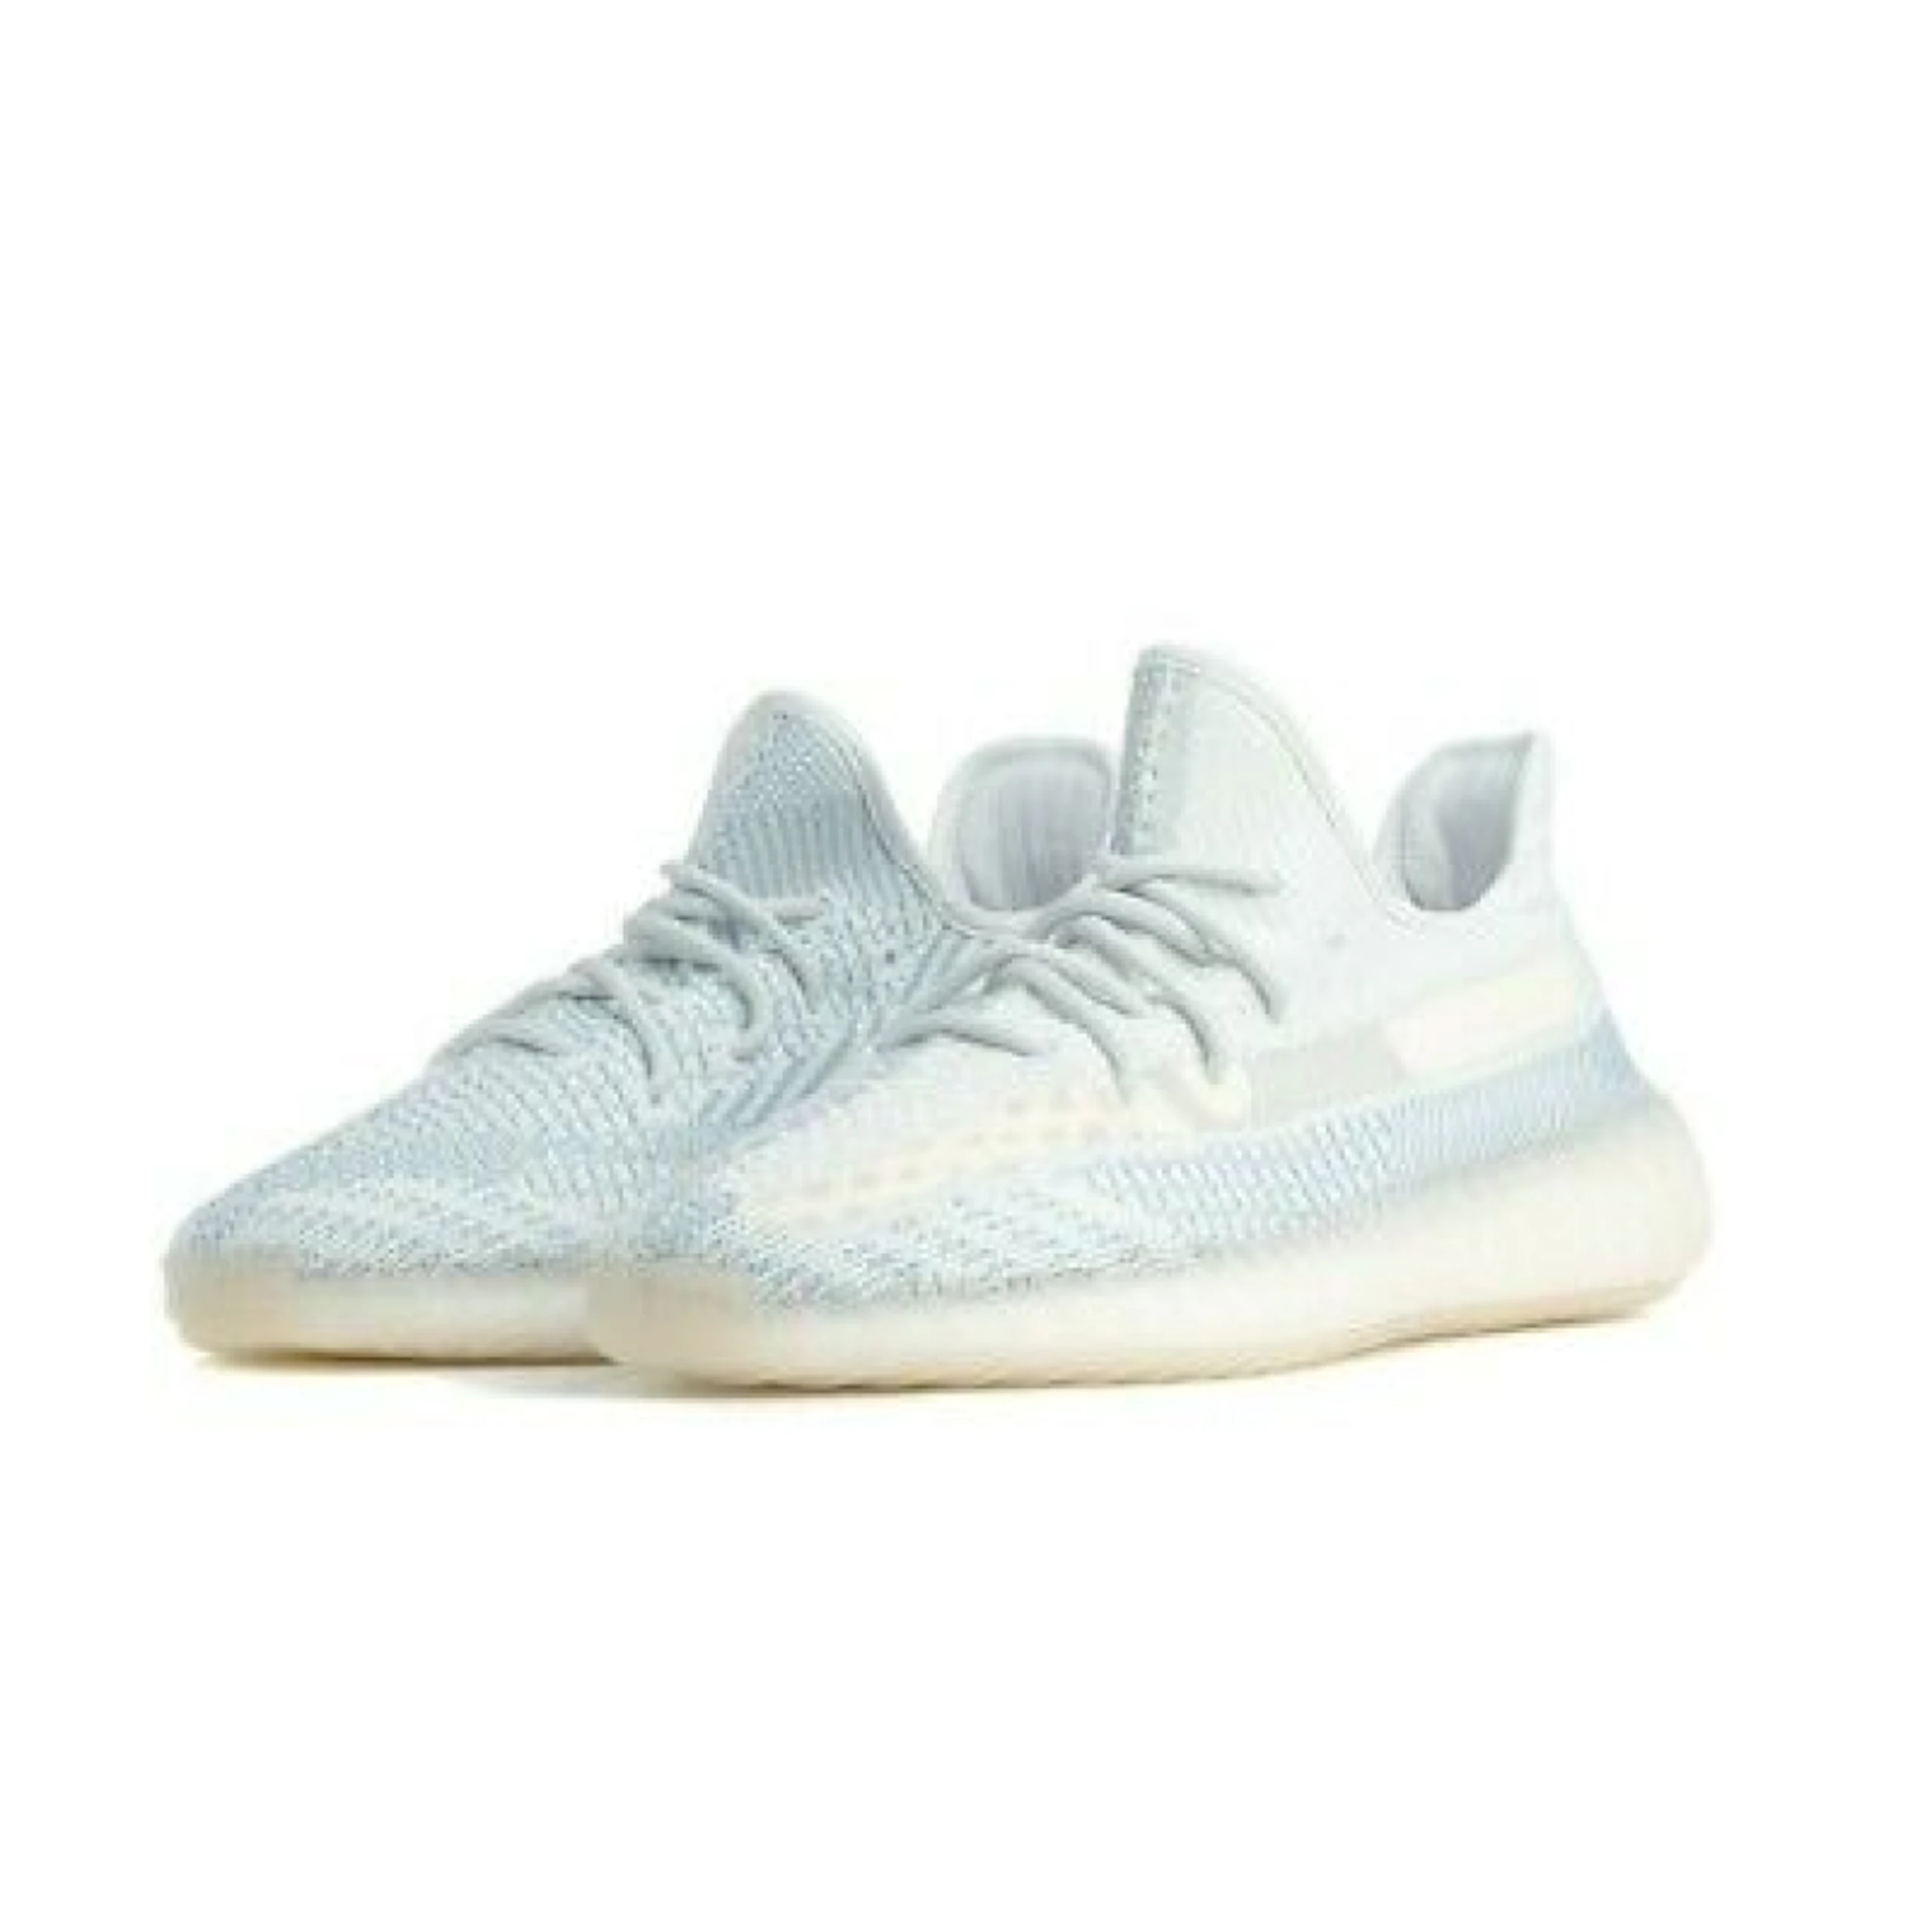 Yeezy Boost 350 V2 Cloud White (Non-Reflective) Glocalzone